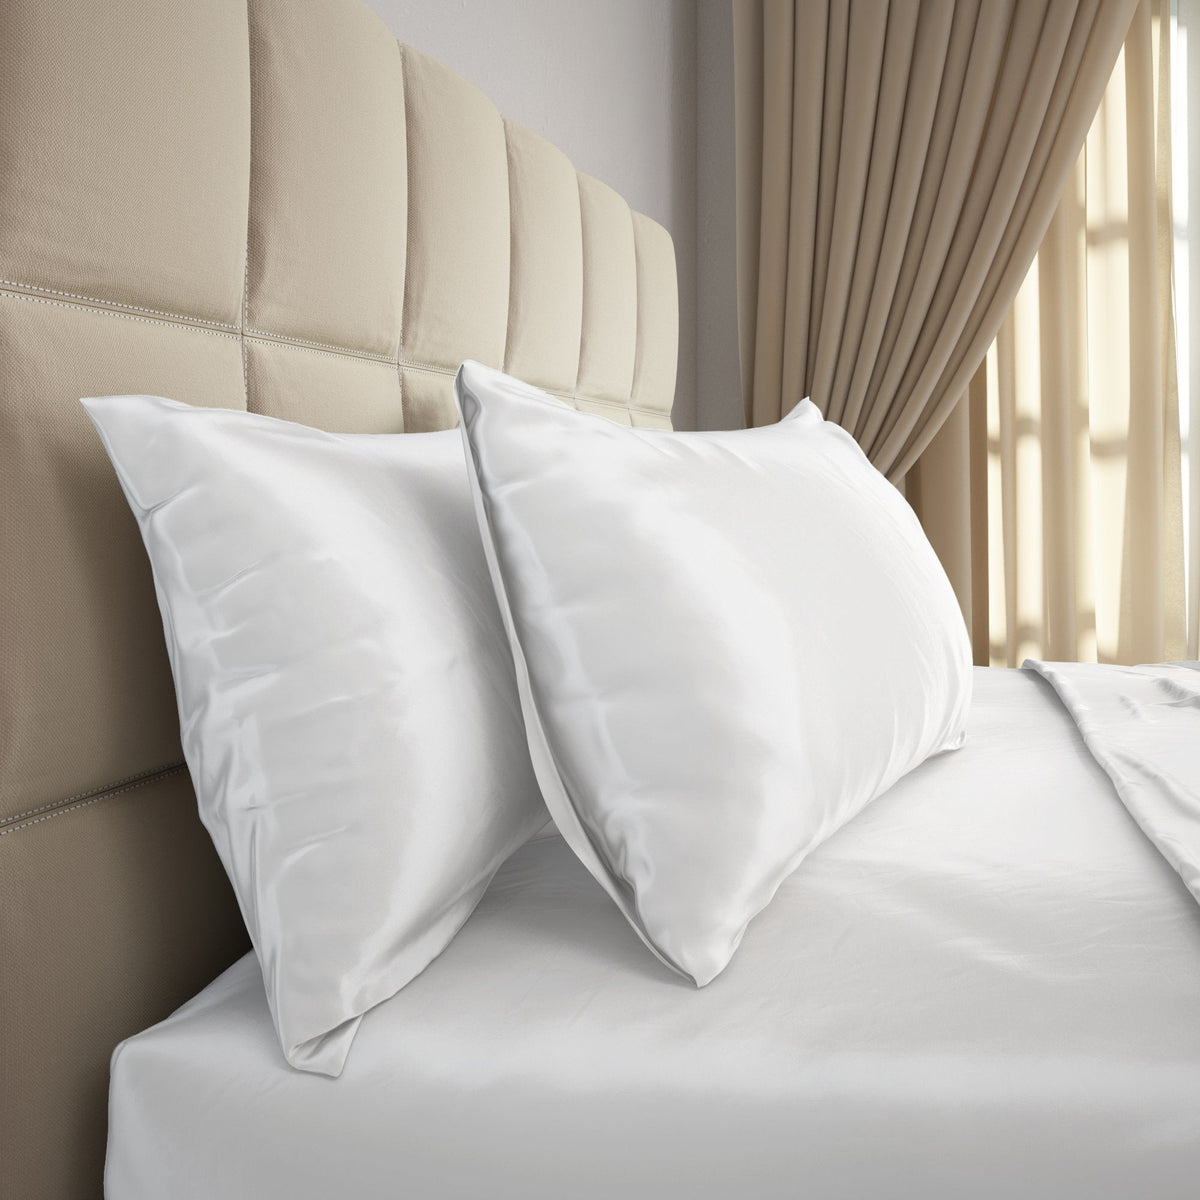 Mulberry Park Silks 19 Momme Silk Pillowcase  Ivory on Bed- Side